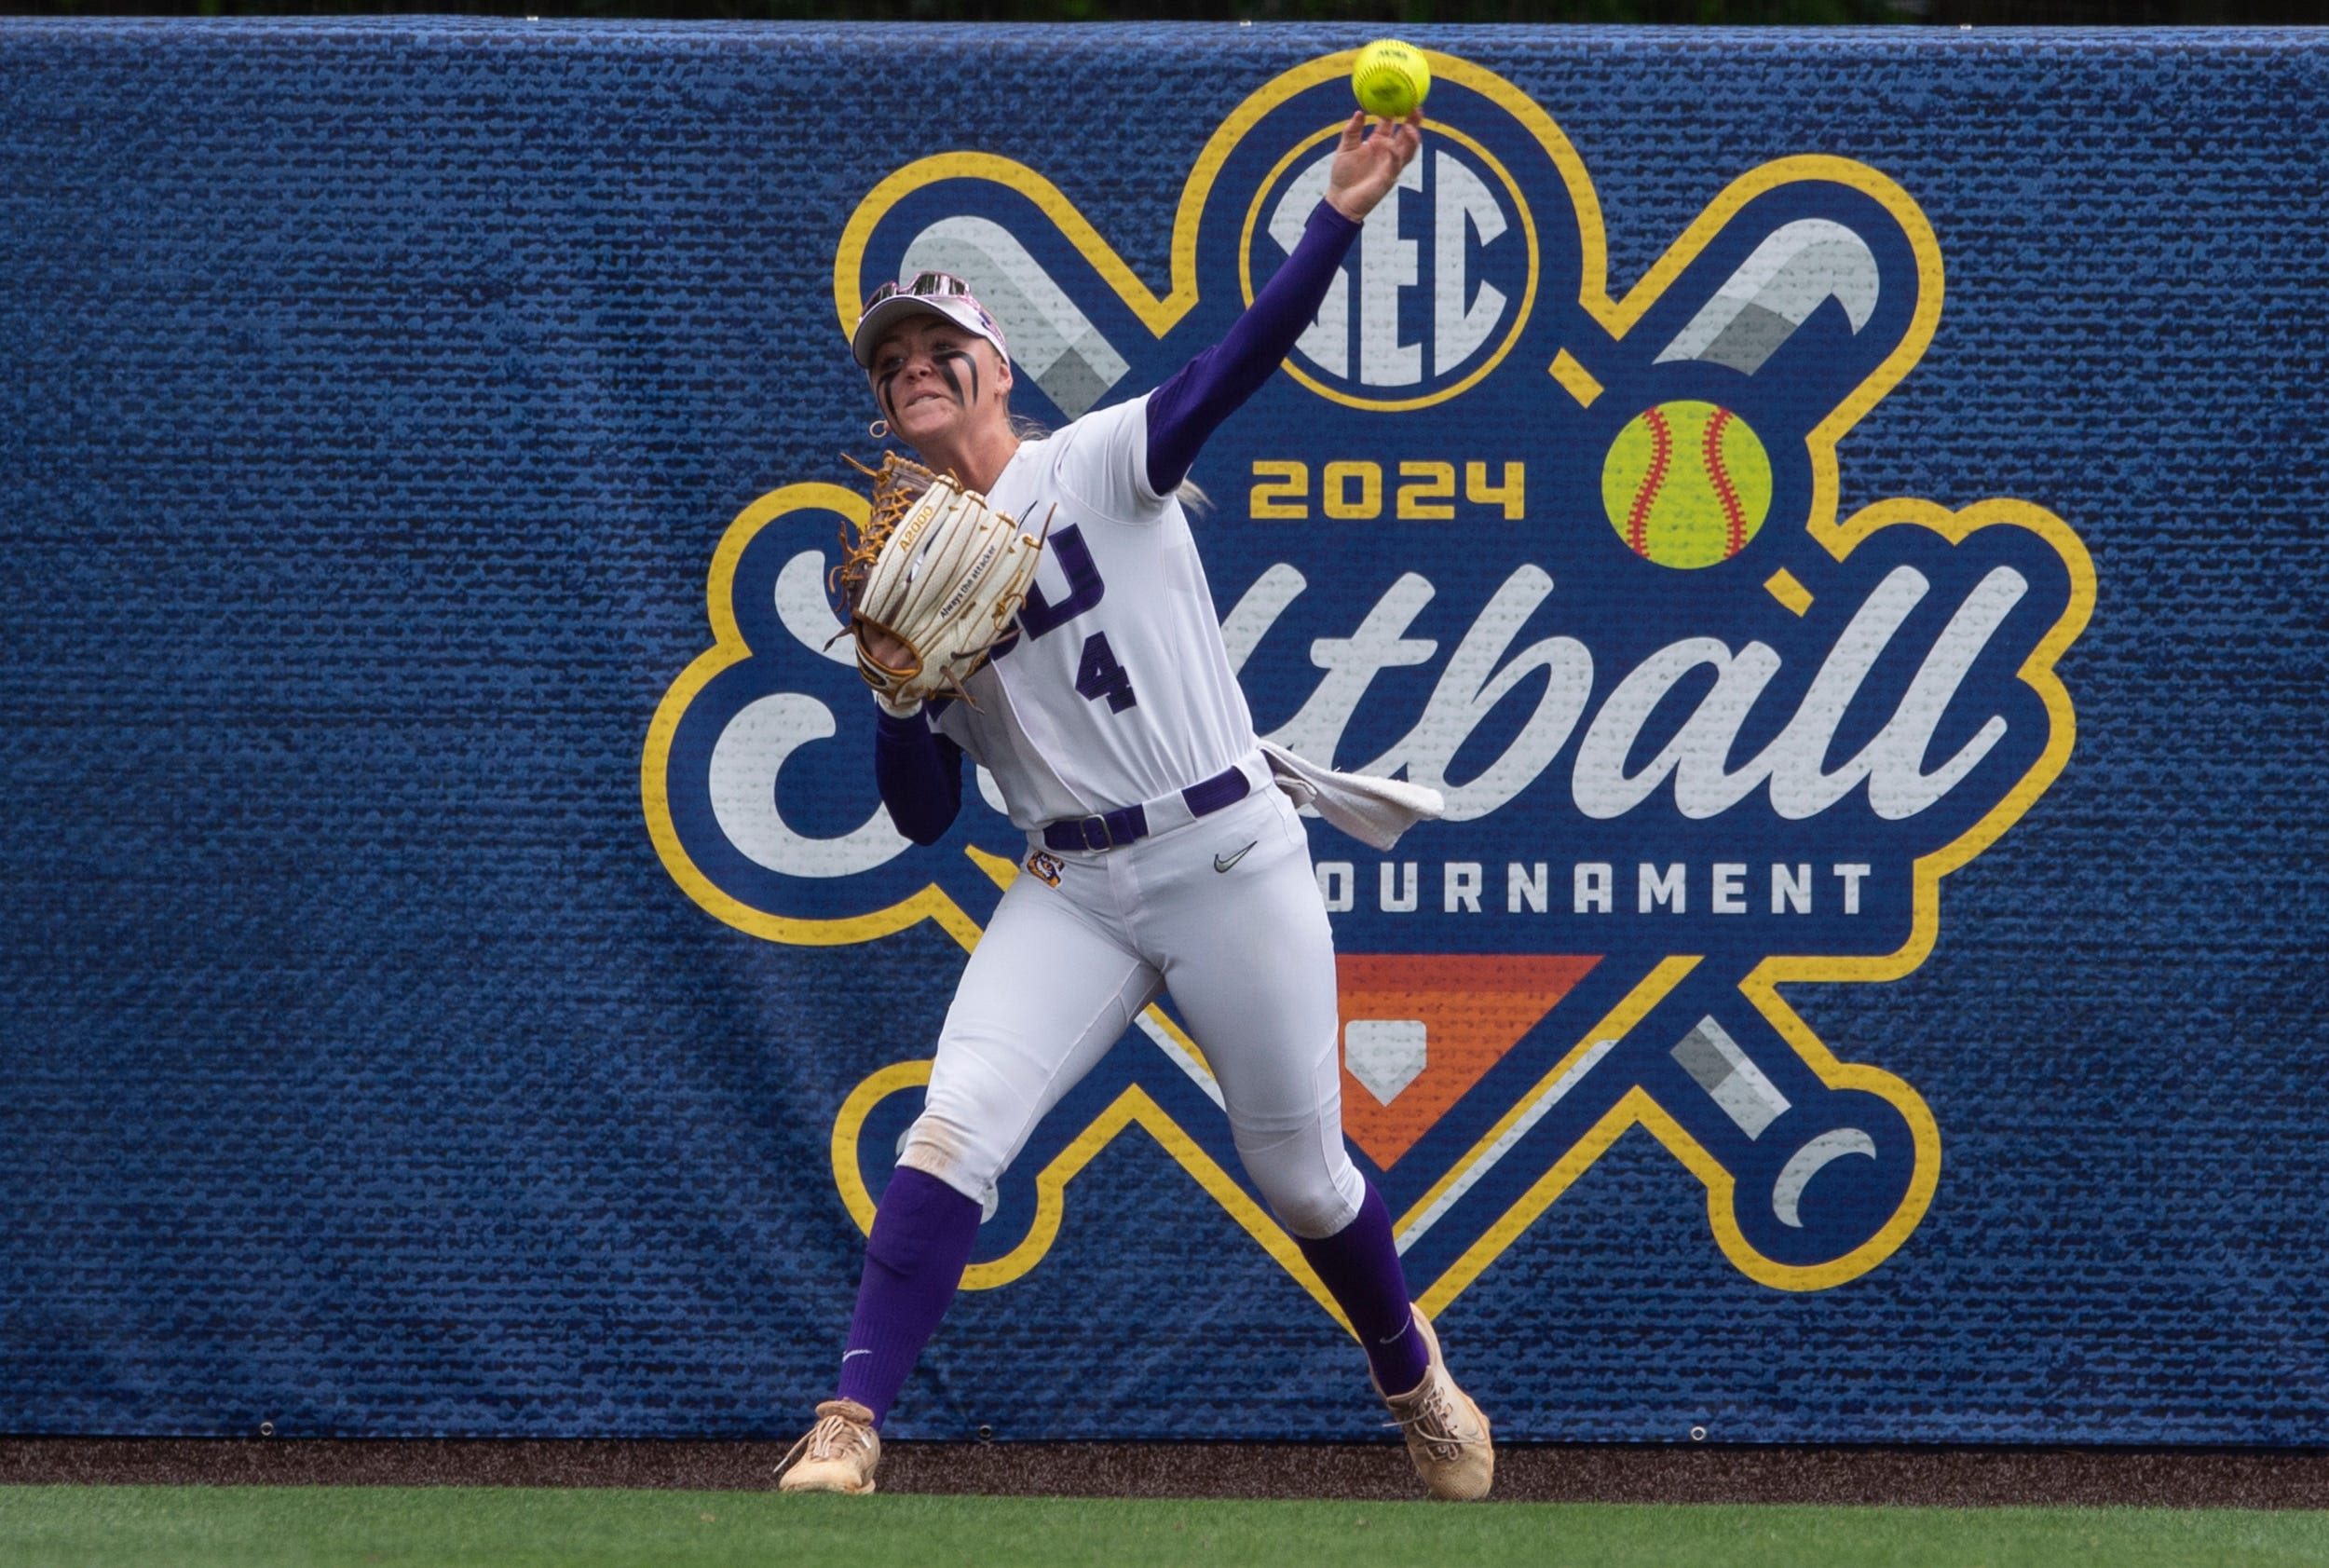 SEC softball leads the way with 13 teams in the NCAA Tournament